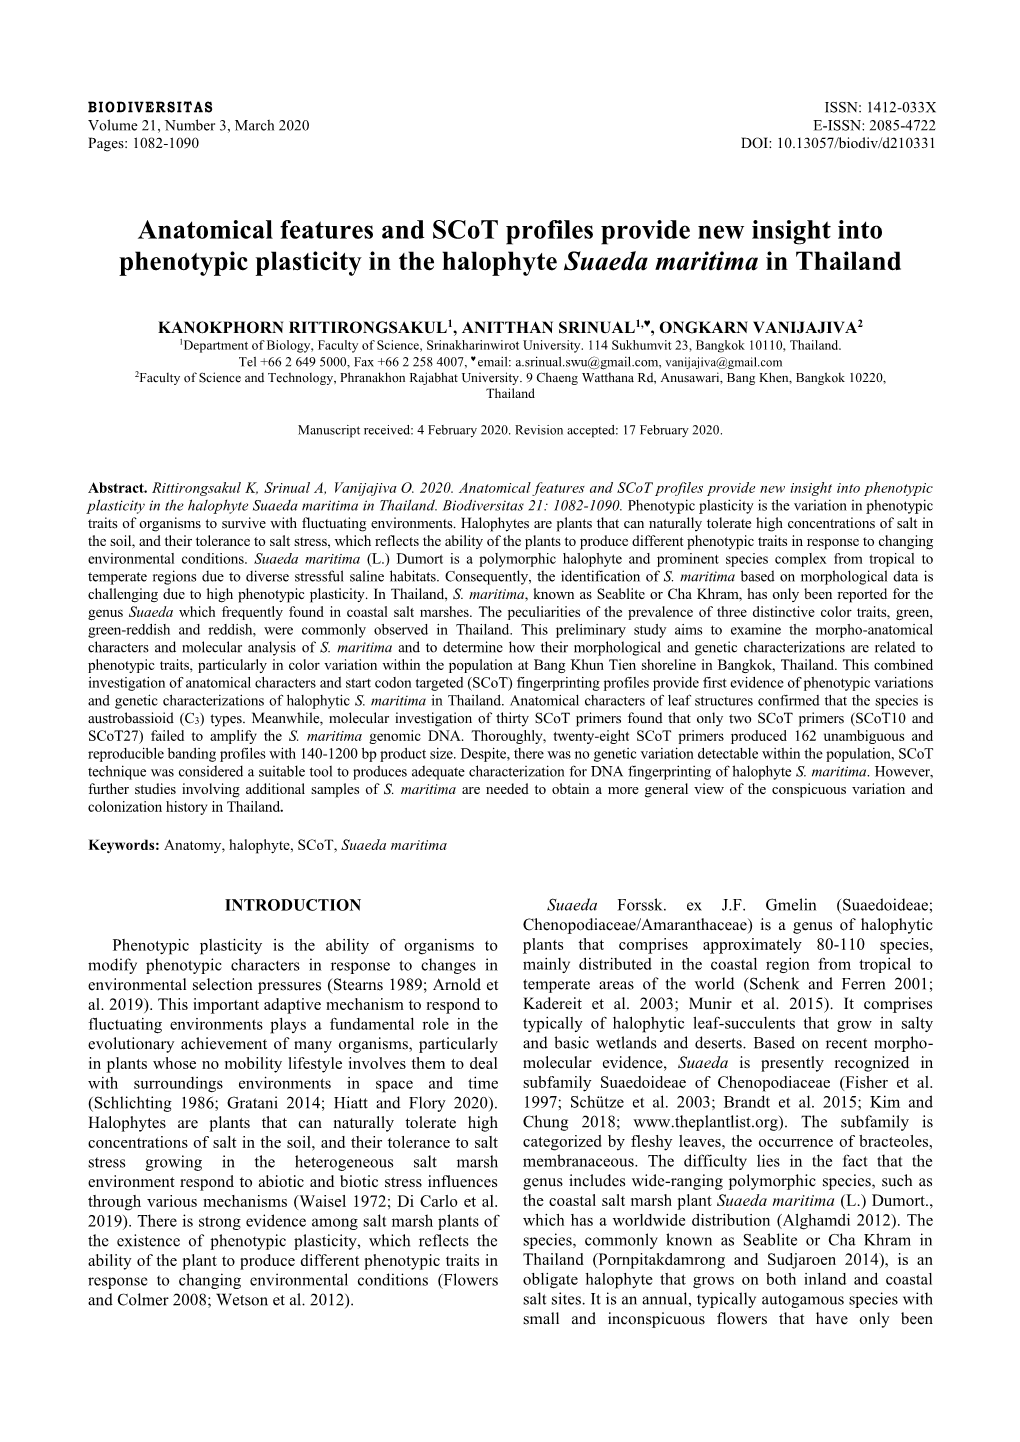 Anatomical Features and Scot Profiles Provide New Insight Into Phenotypic Plasticity in the Halophyte Suaeda Maritima in Thailand